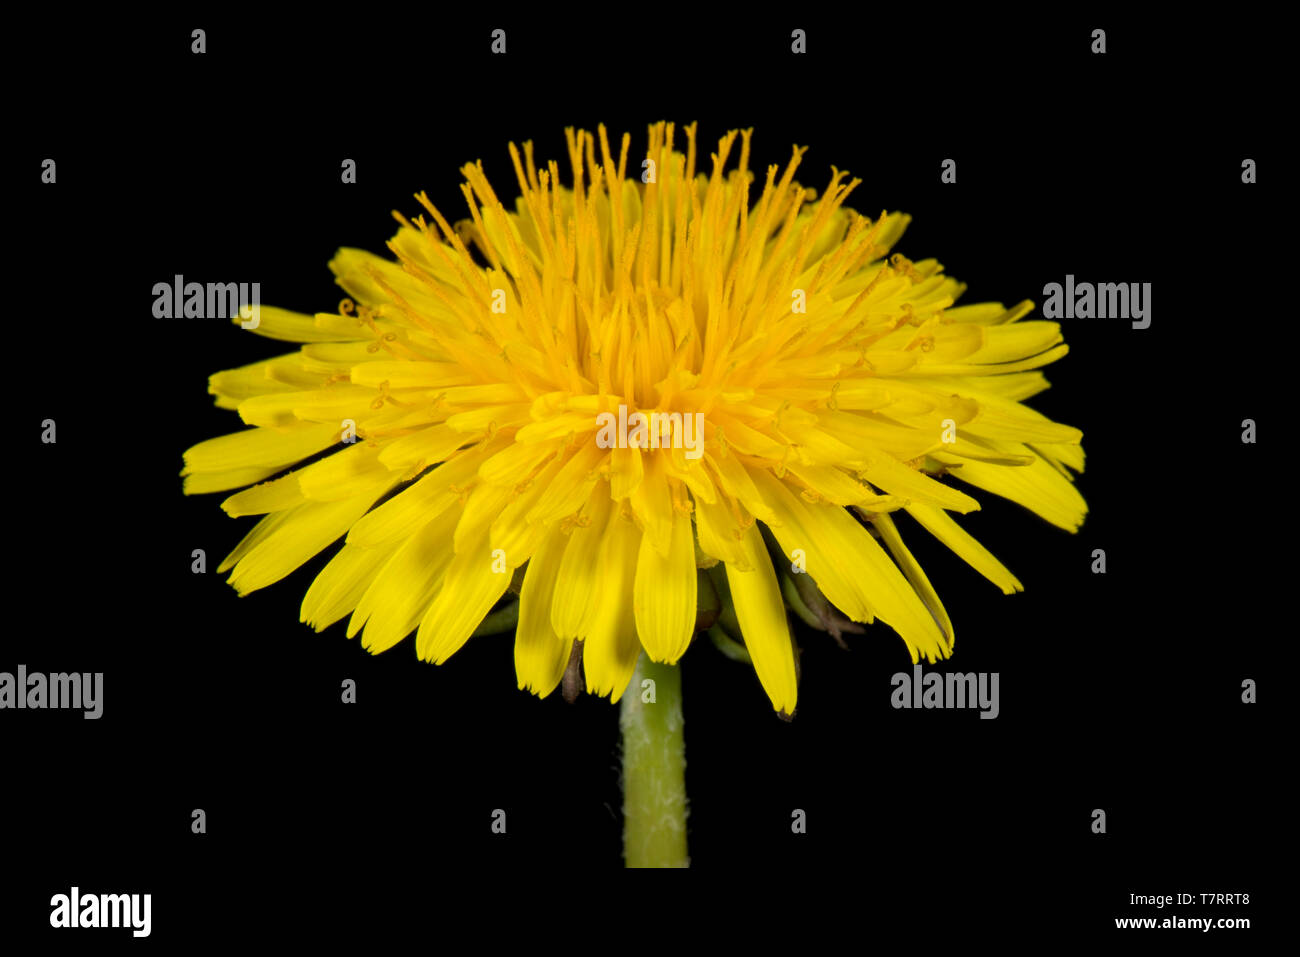 Studio image of a dandelion (Taraxacum officinale) yellow flower to show composite structure of ray and disk florets Stock Photo